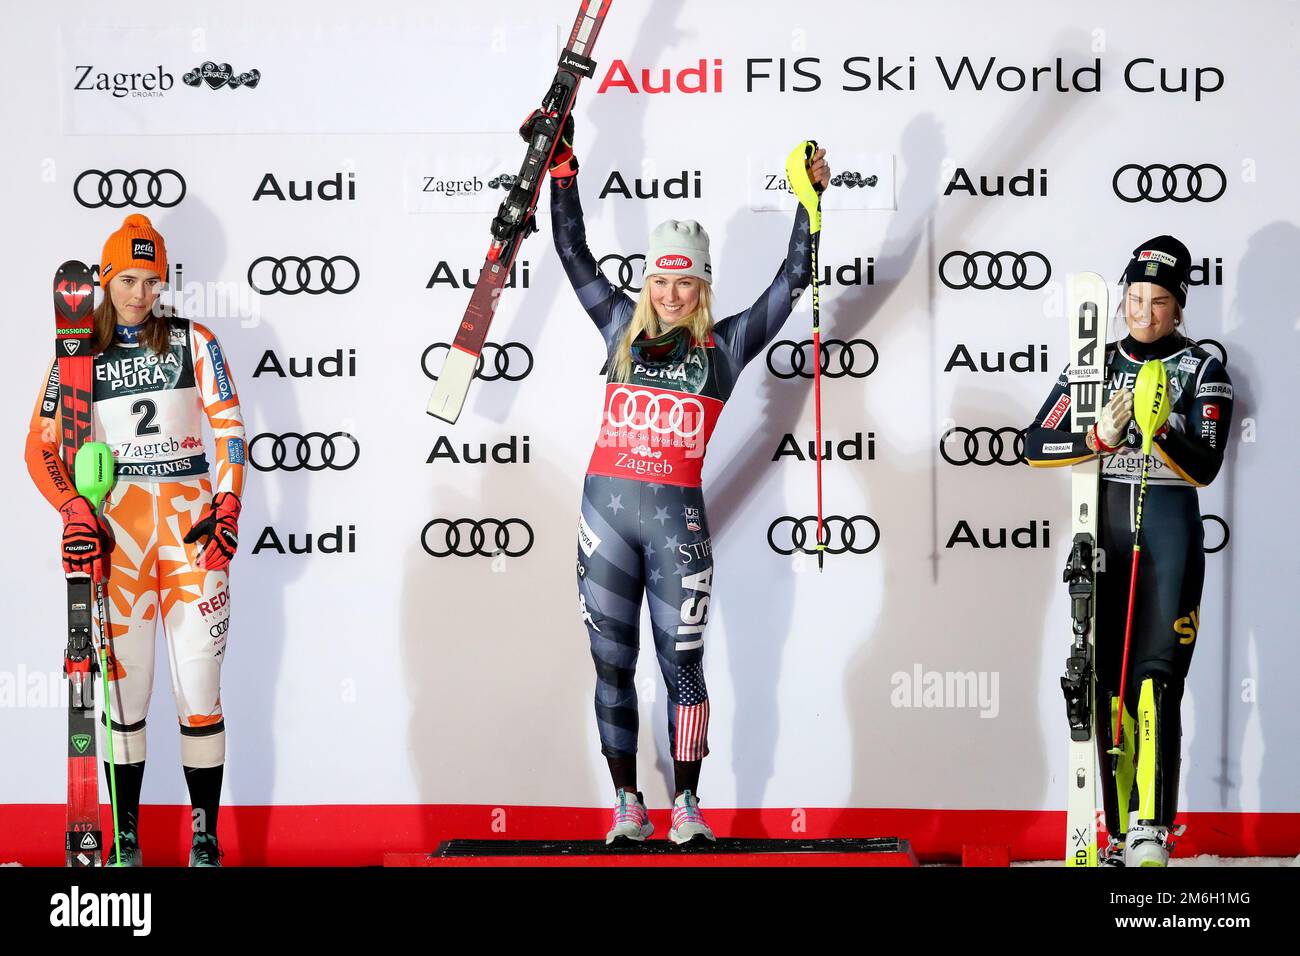 zagreb croatia 04th jan 2023 zagreb croatia january 04 second place petra vlhova of slovakia first place mikaela shiffrin of usa and third place anna swenn larsson of sweden pose during the audi fis ski world cup snow queen trophy womens slalom medal ceremony at sljeme on january 4 2023 in zagreb croatia photo matija habljakpixsell credit pixsellalamy live news 2M6H1MG